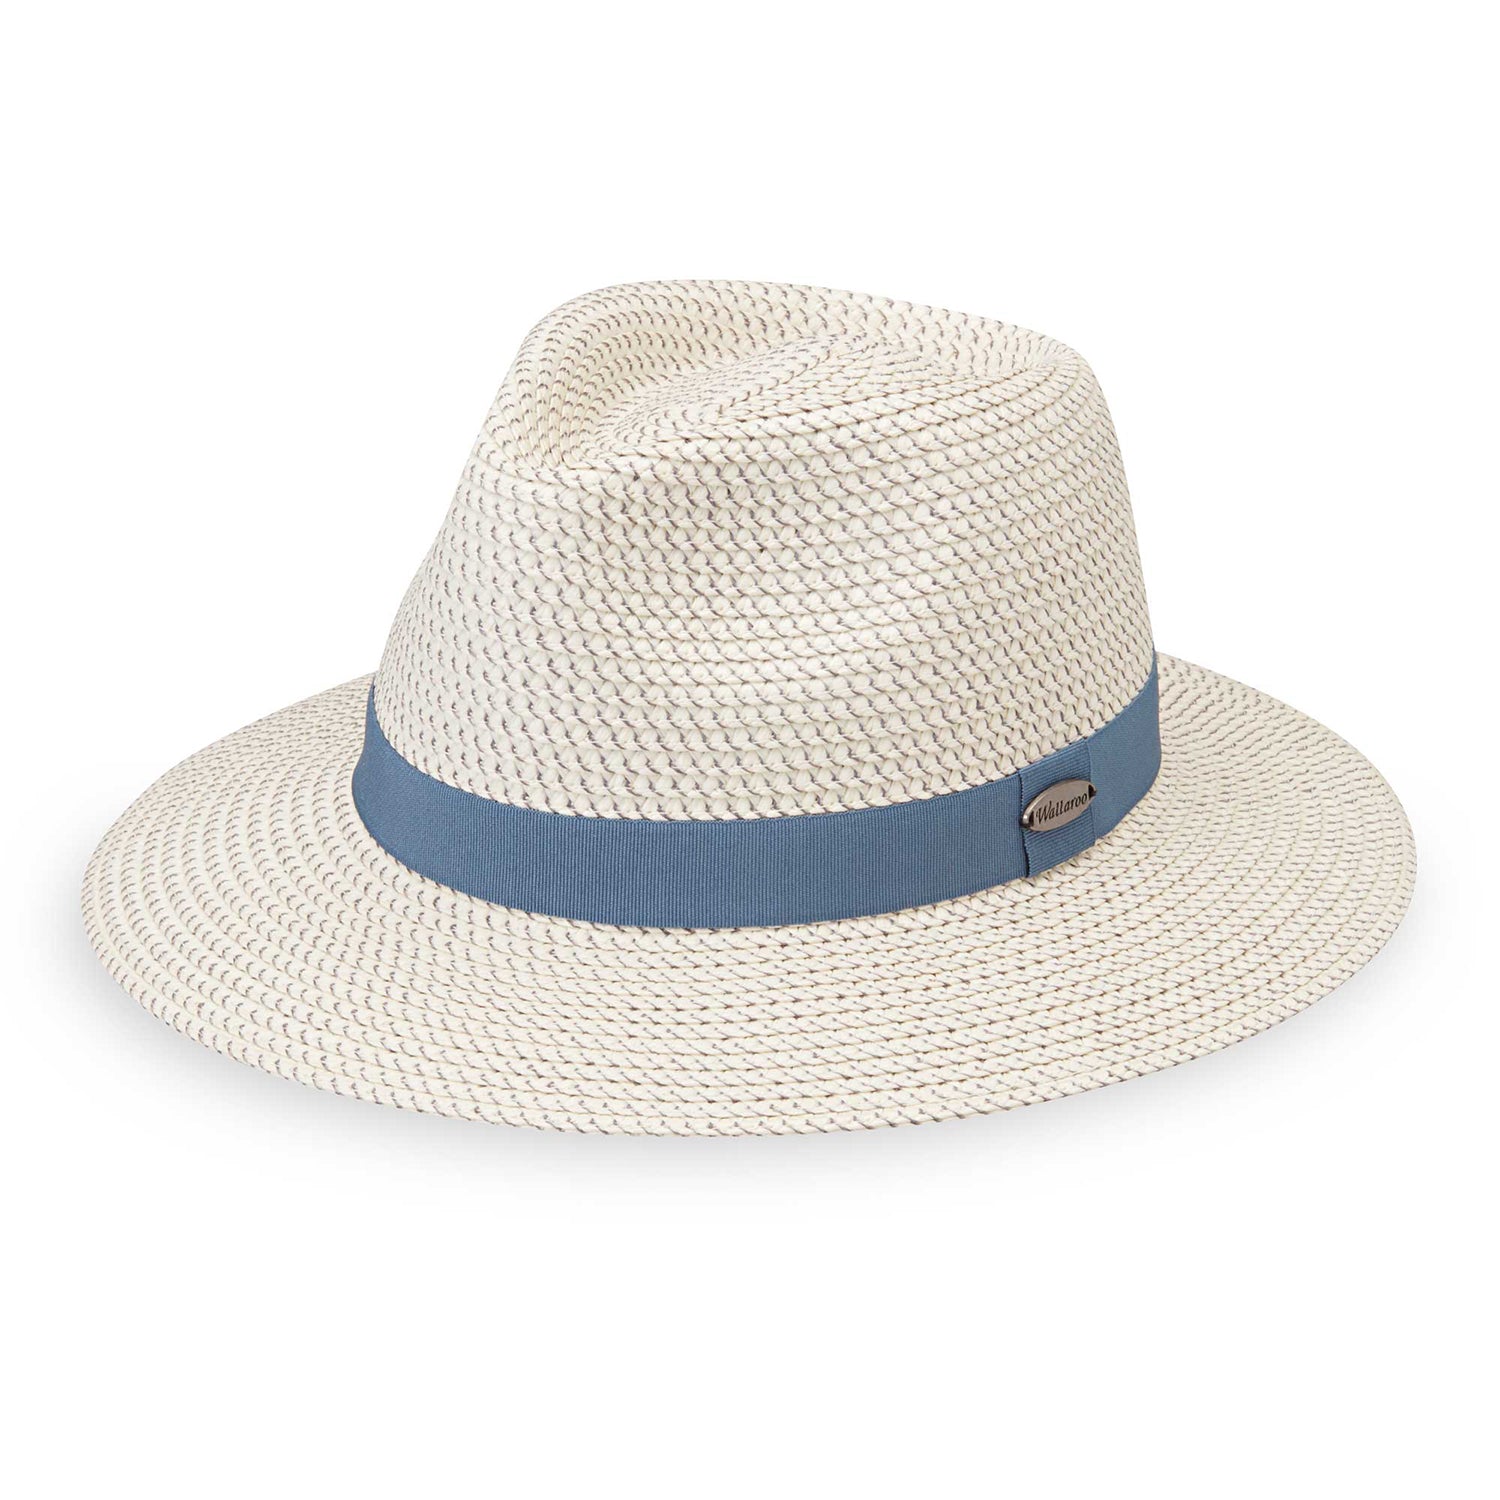 Featuring Ladies' petite charlie sun hat by Wallaroo, made with packable, UPF 50 material